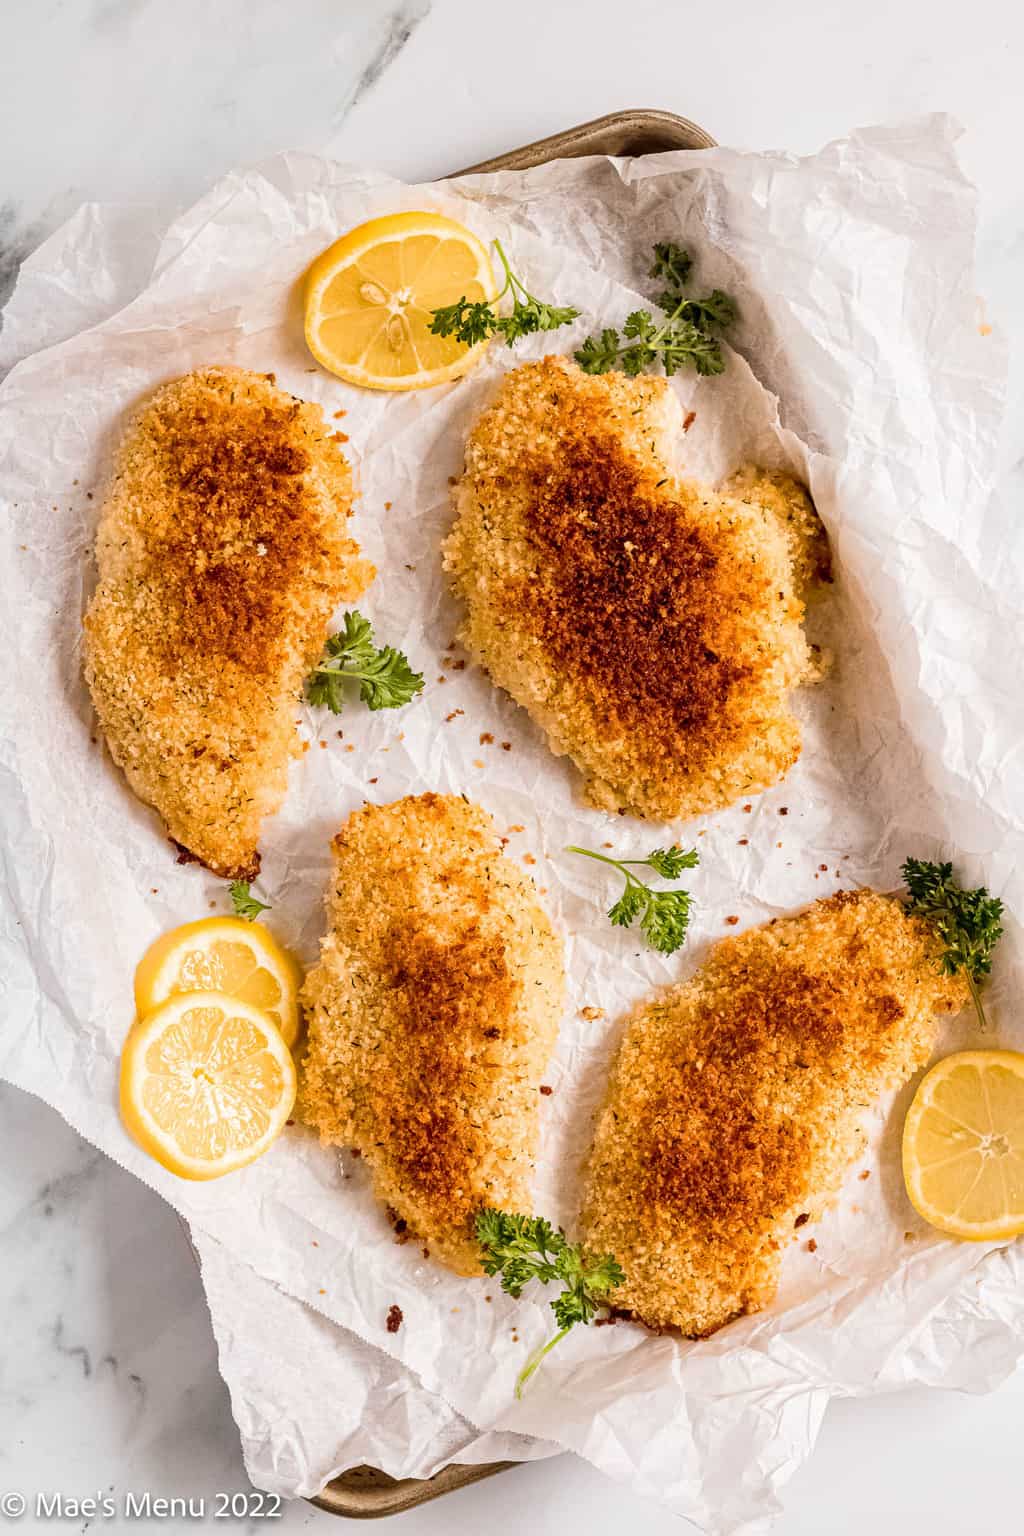 Herbed panko chicken breasts on a baking sheet with parsley and lemon.